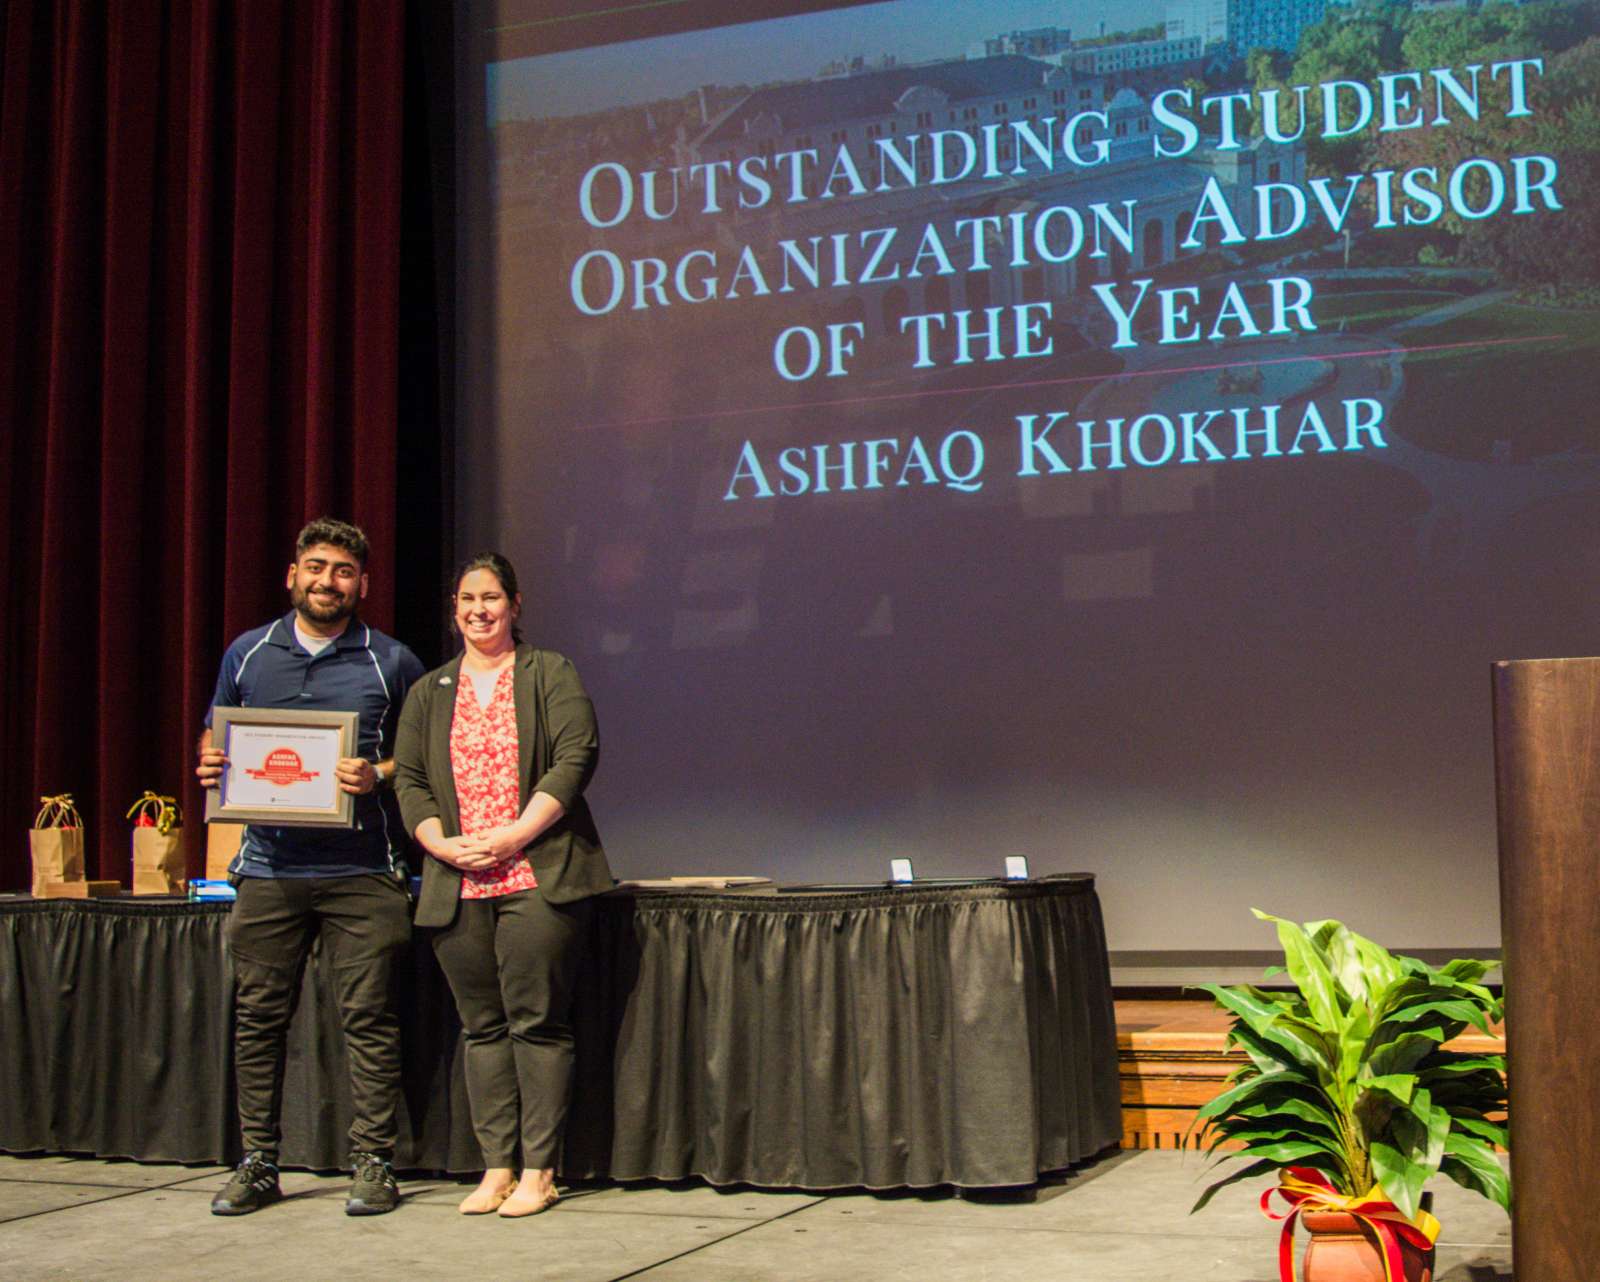 A photo of a student organization receiving an award for best advisor of the year.